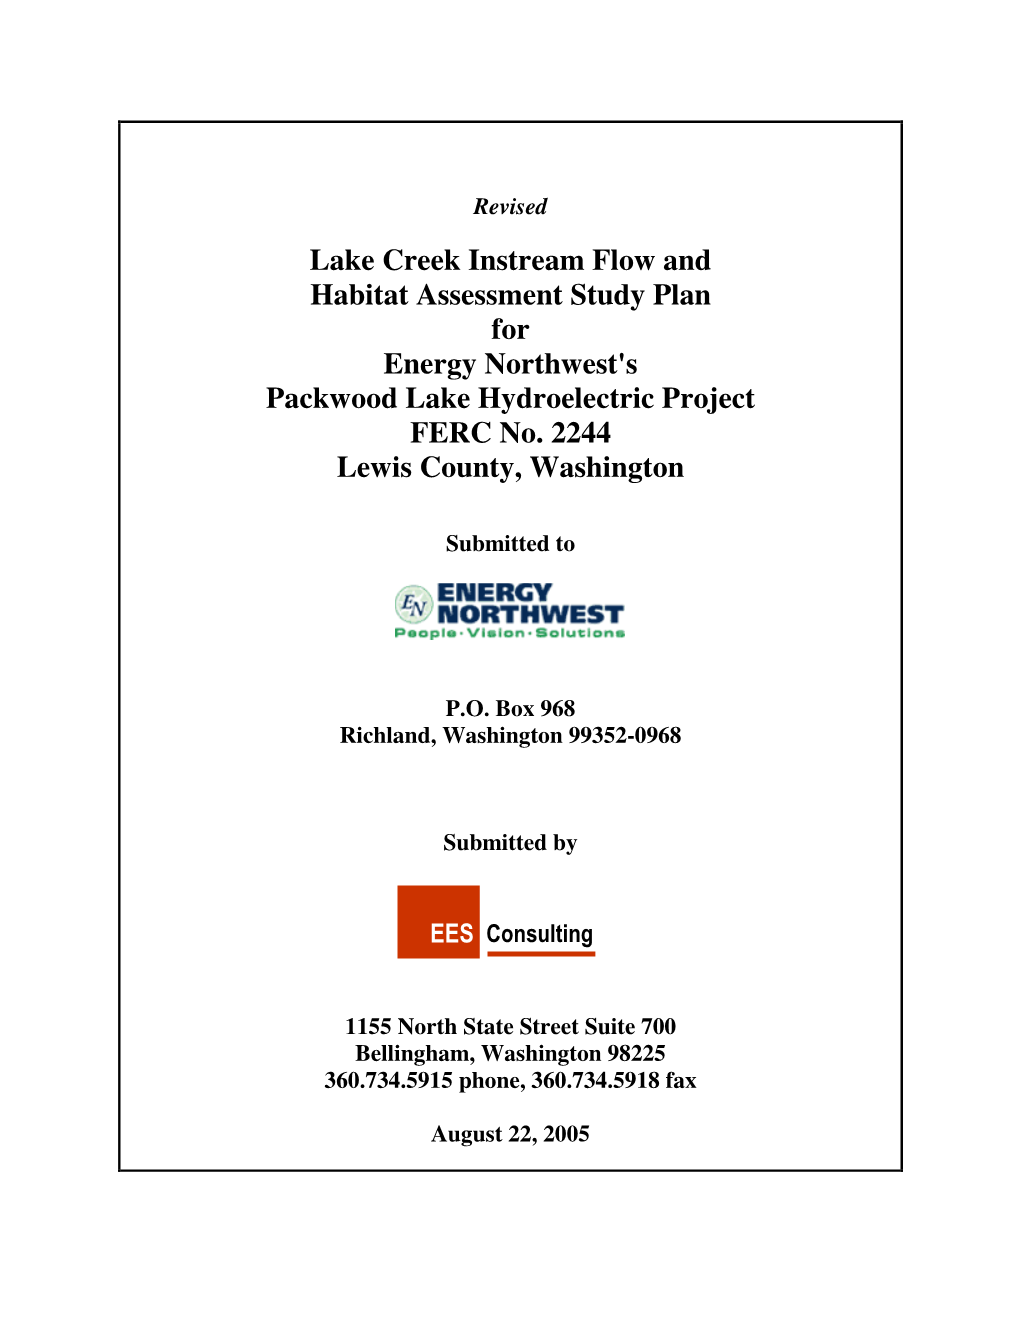 Lake Creek Instream Flow and Habitat Assessment Study Plan for Energy Northwest's Packwood Lake Hydroelectric Project FERC No